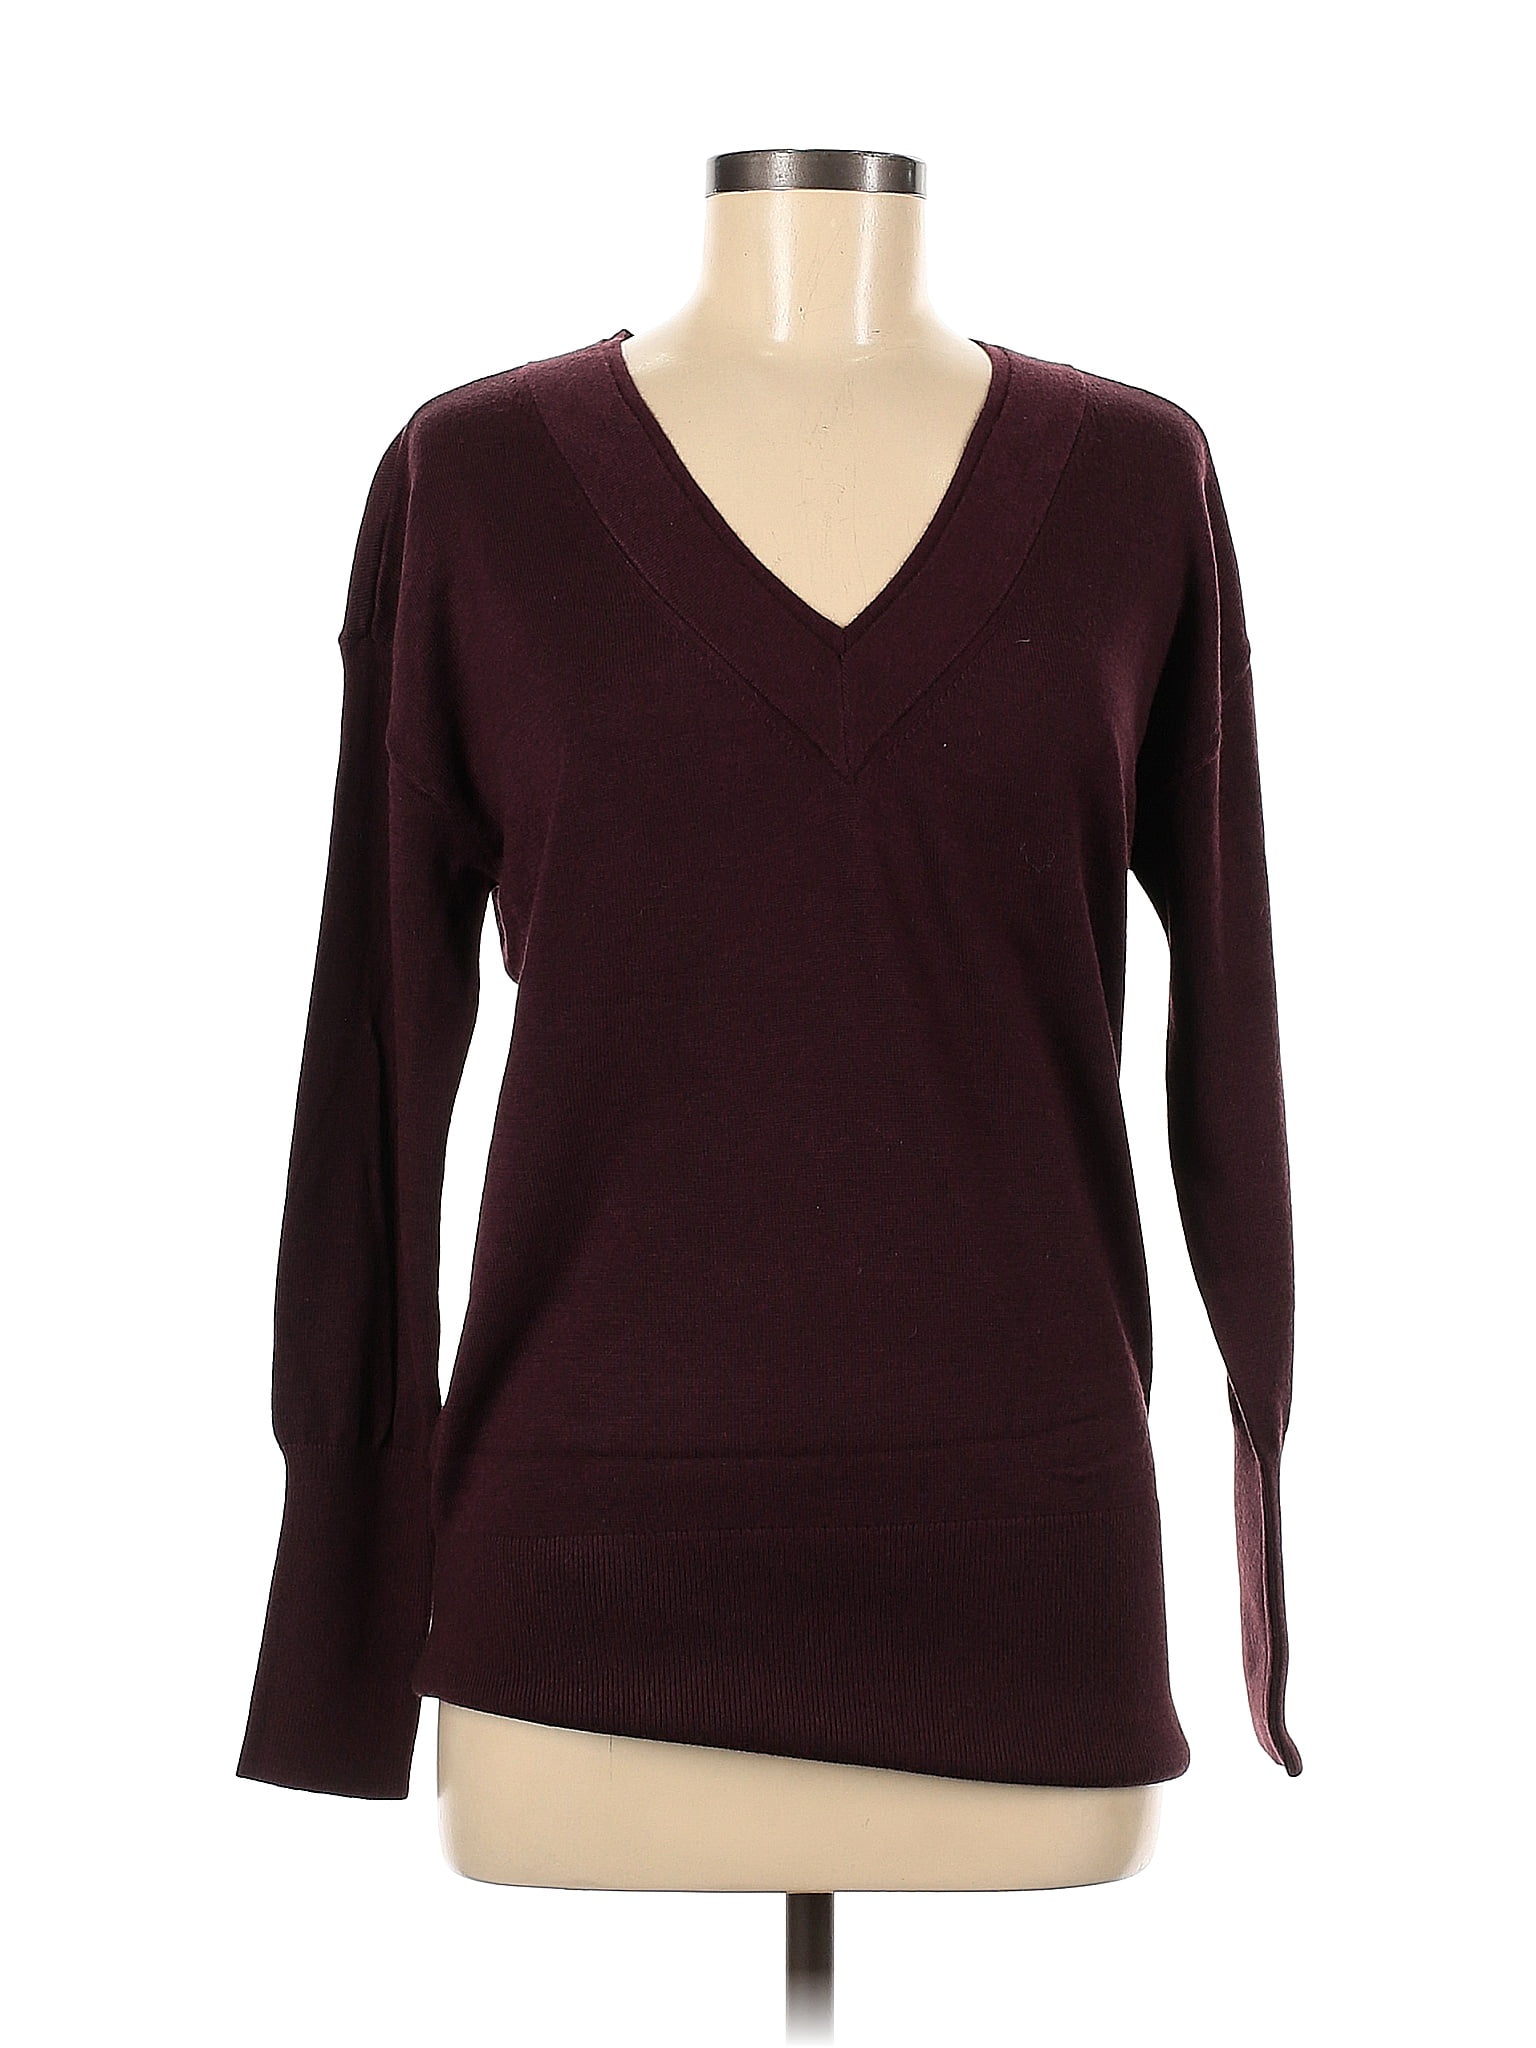 White House Black Market Burgundy Pullover Sweater Size M - 69% off ...